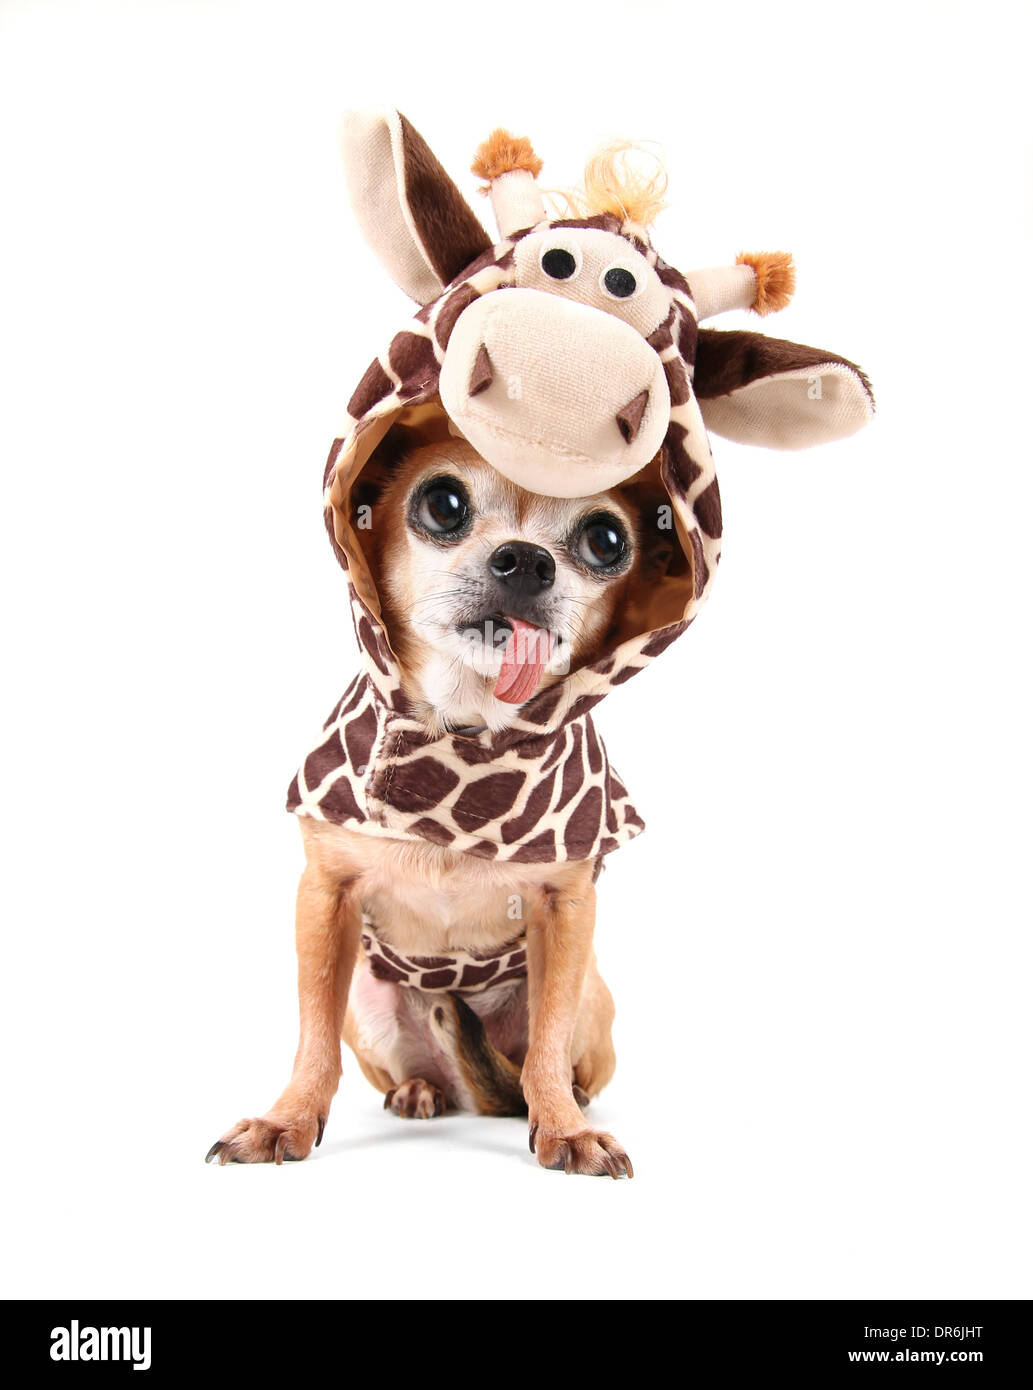 cute chihuahua with a costume on Stock Photo